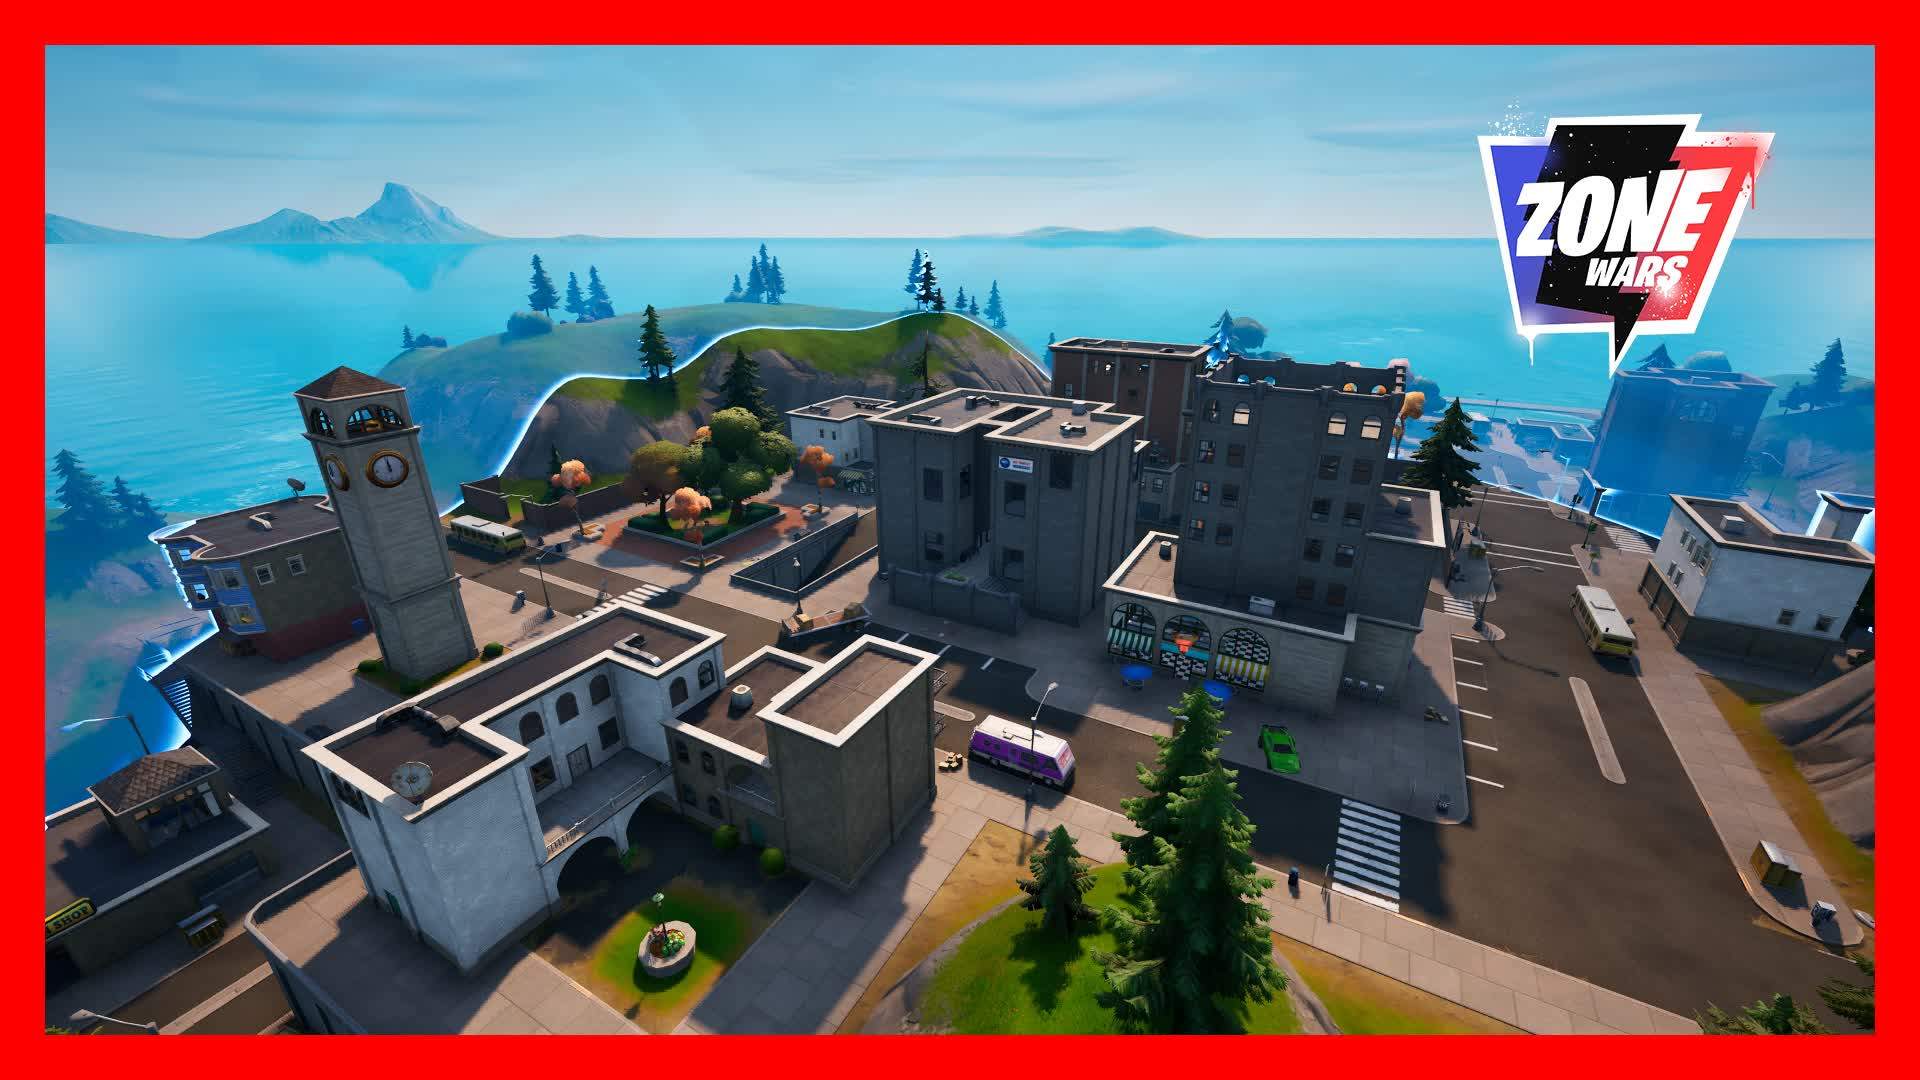 Tilted Towers - Zone Wars